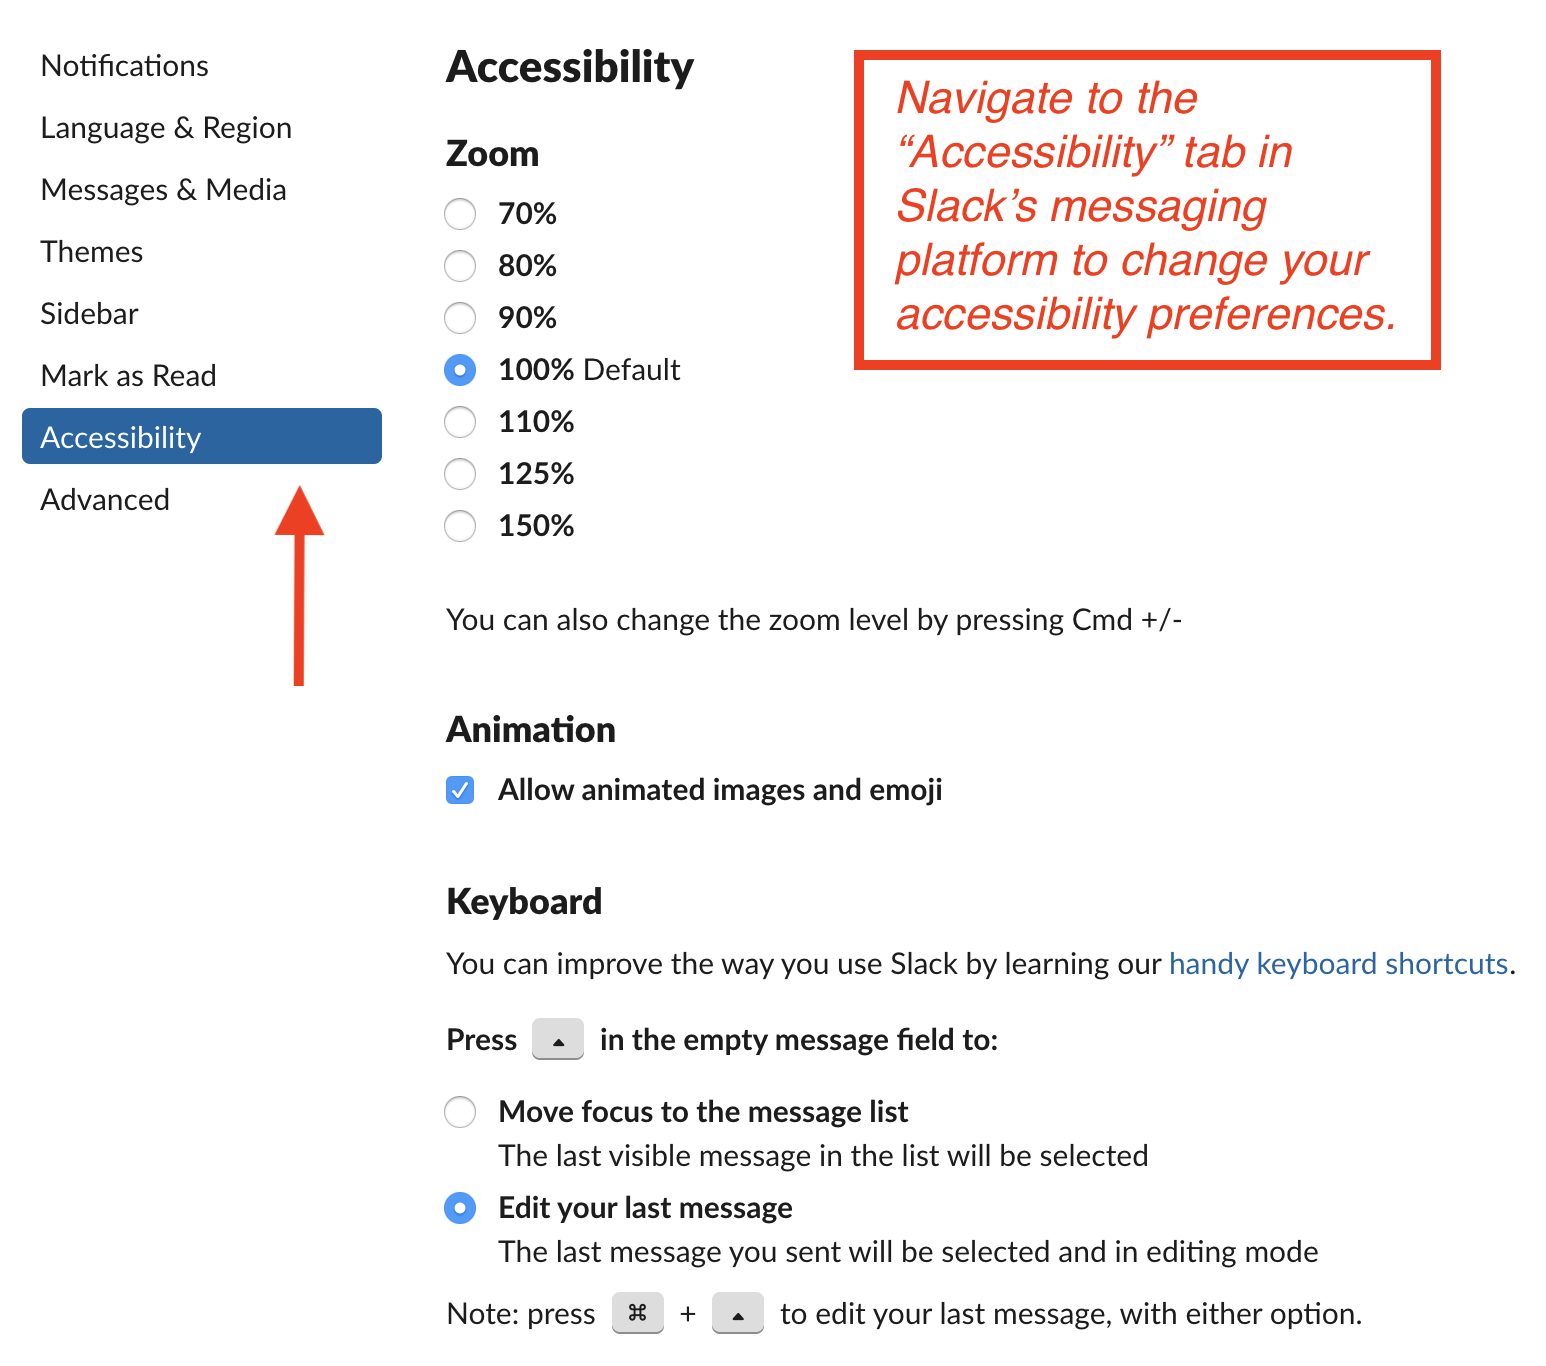 Navigate to the "Accessibility" tab in Slack's messaging platform to change your accessibility preferences.